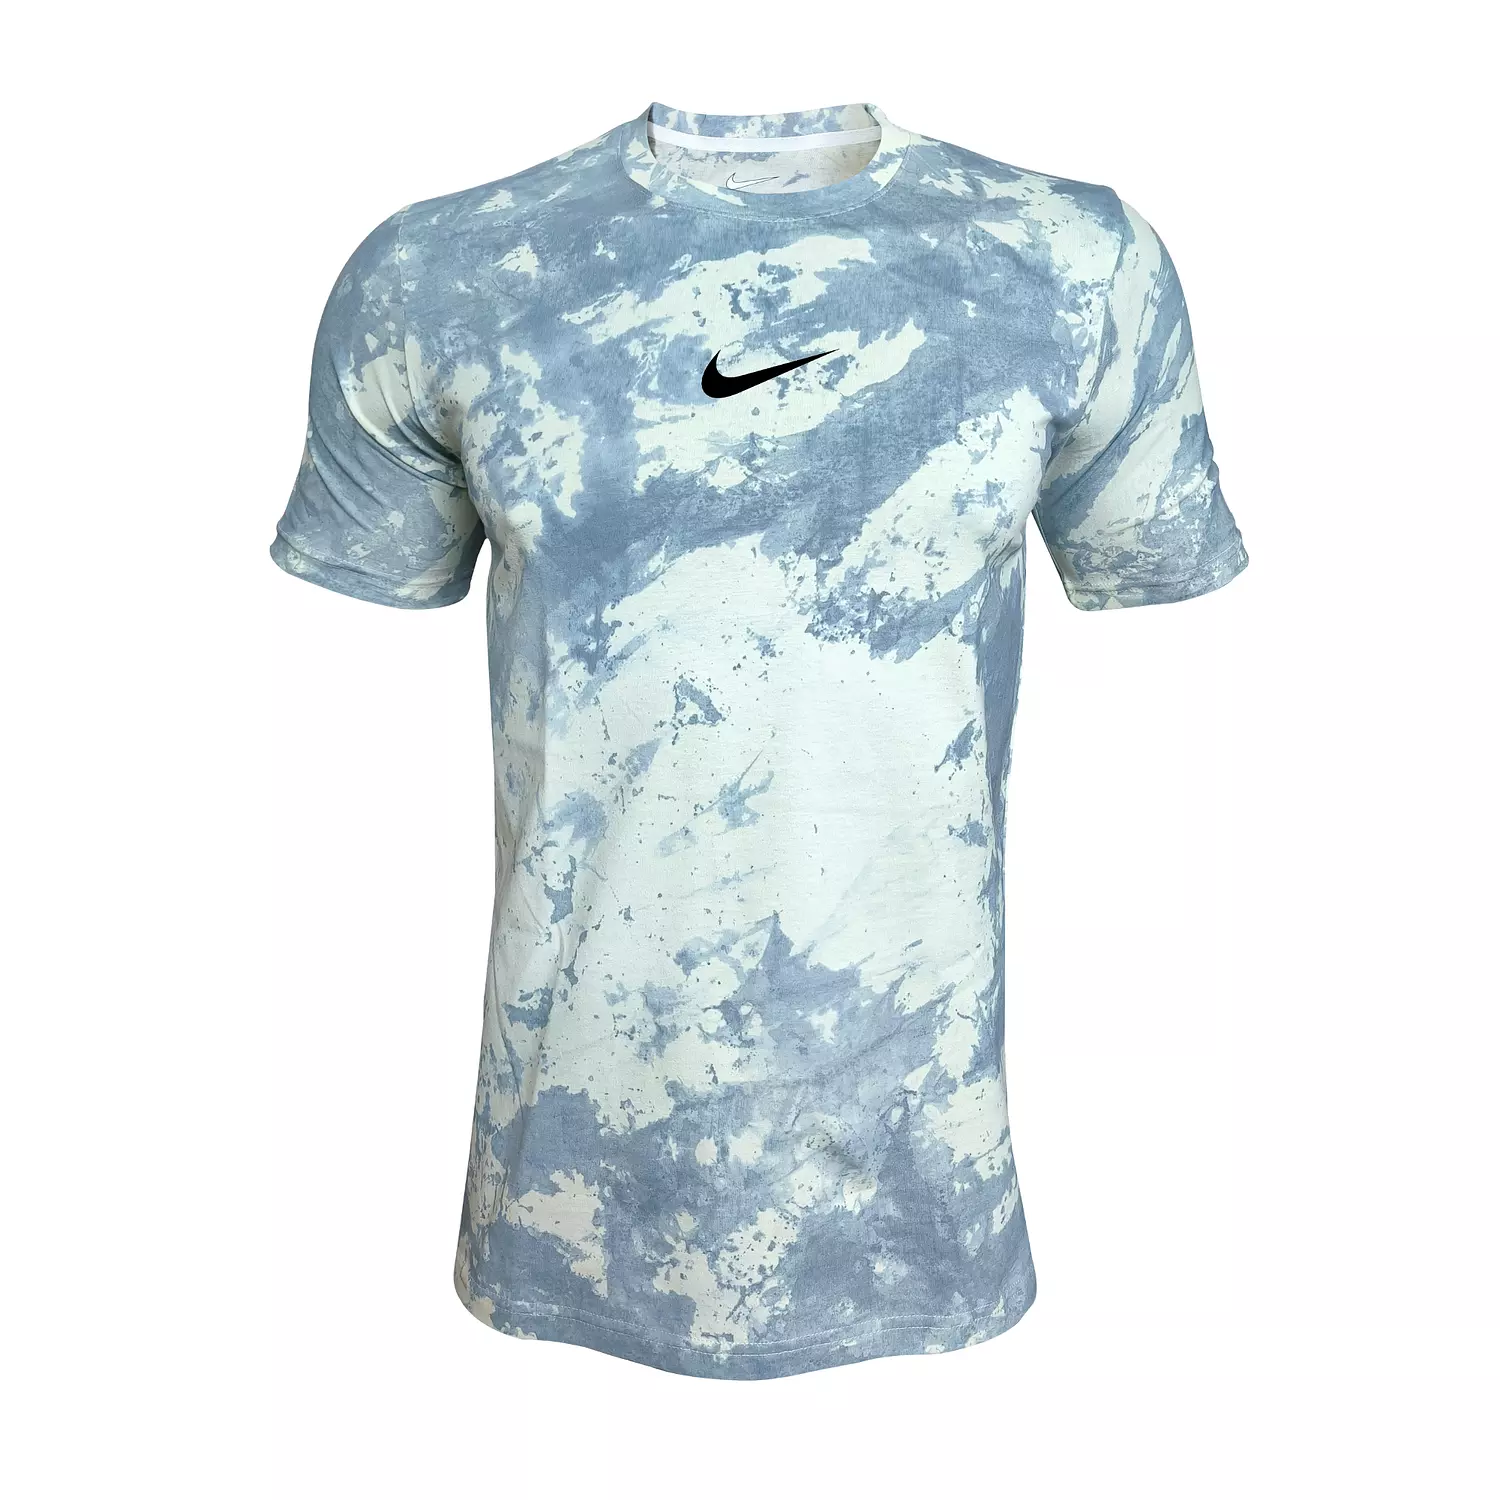 <p><strong>NIKE</strong></p><p style="text-align: center"><strong><span style="color: rgb(161, 161, 161)">COTTON T-SHIRT</span></strong></p>